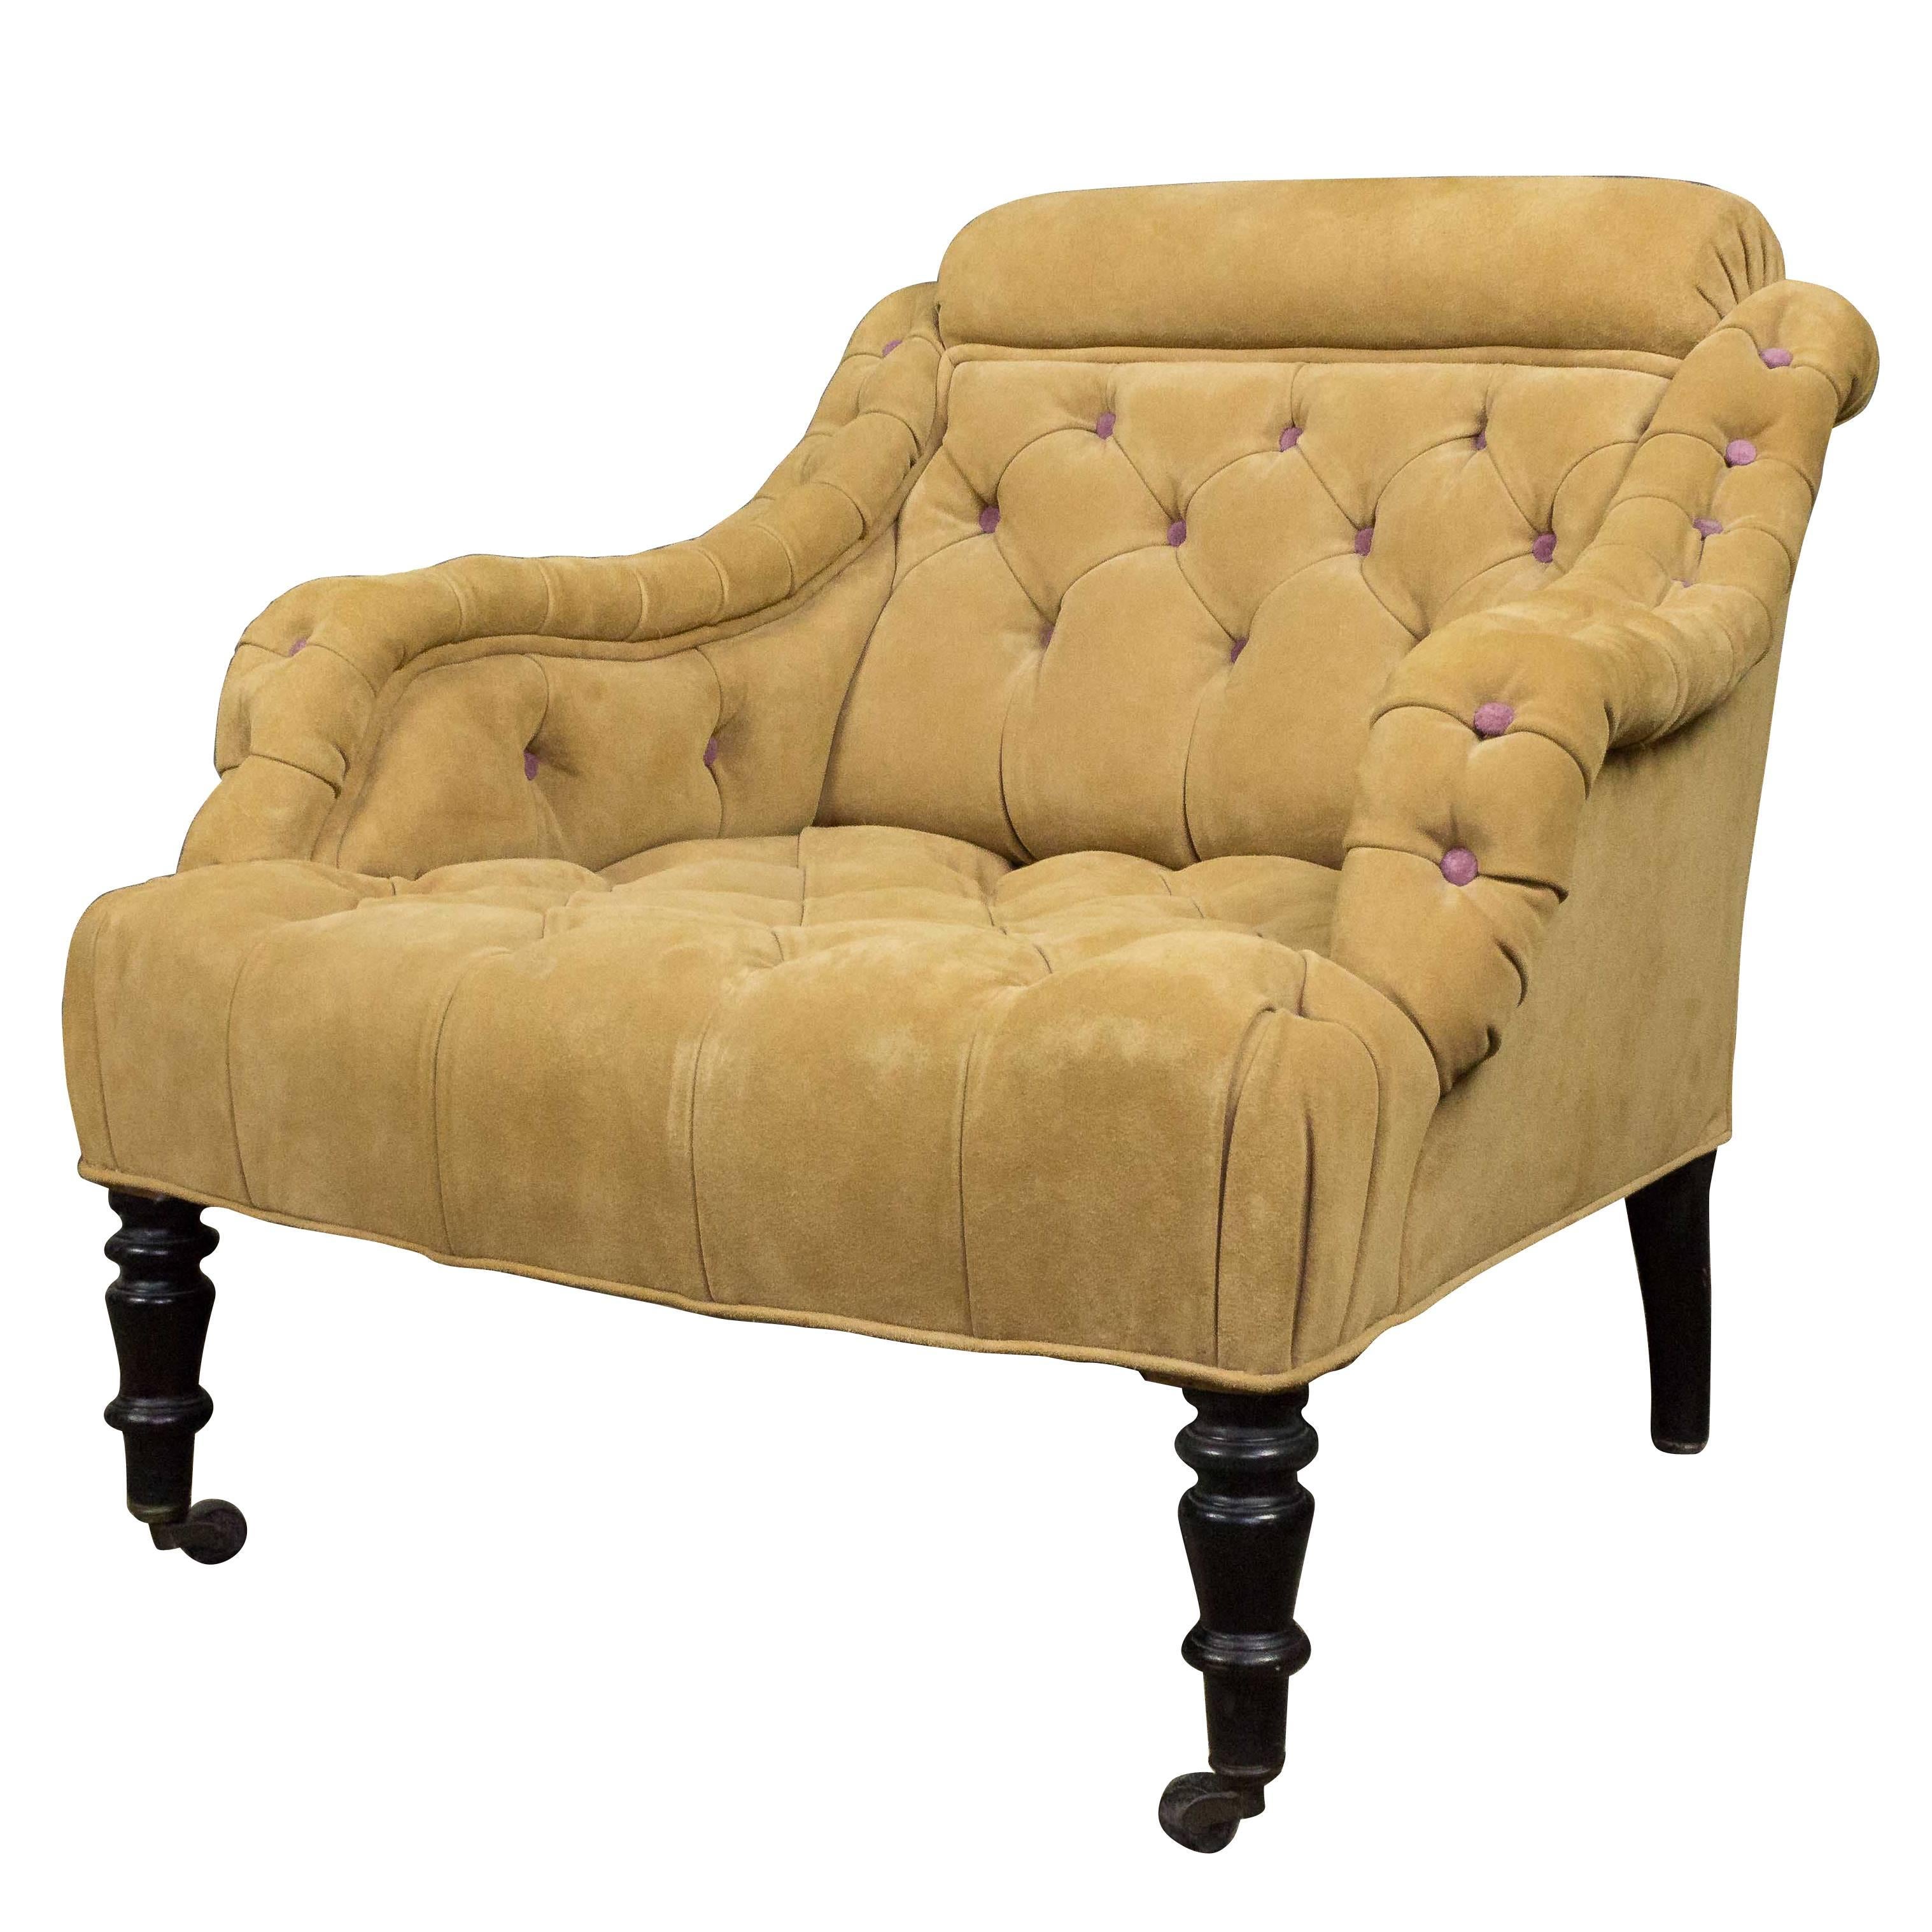 19th Century Tufted Suede Armchair